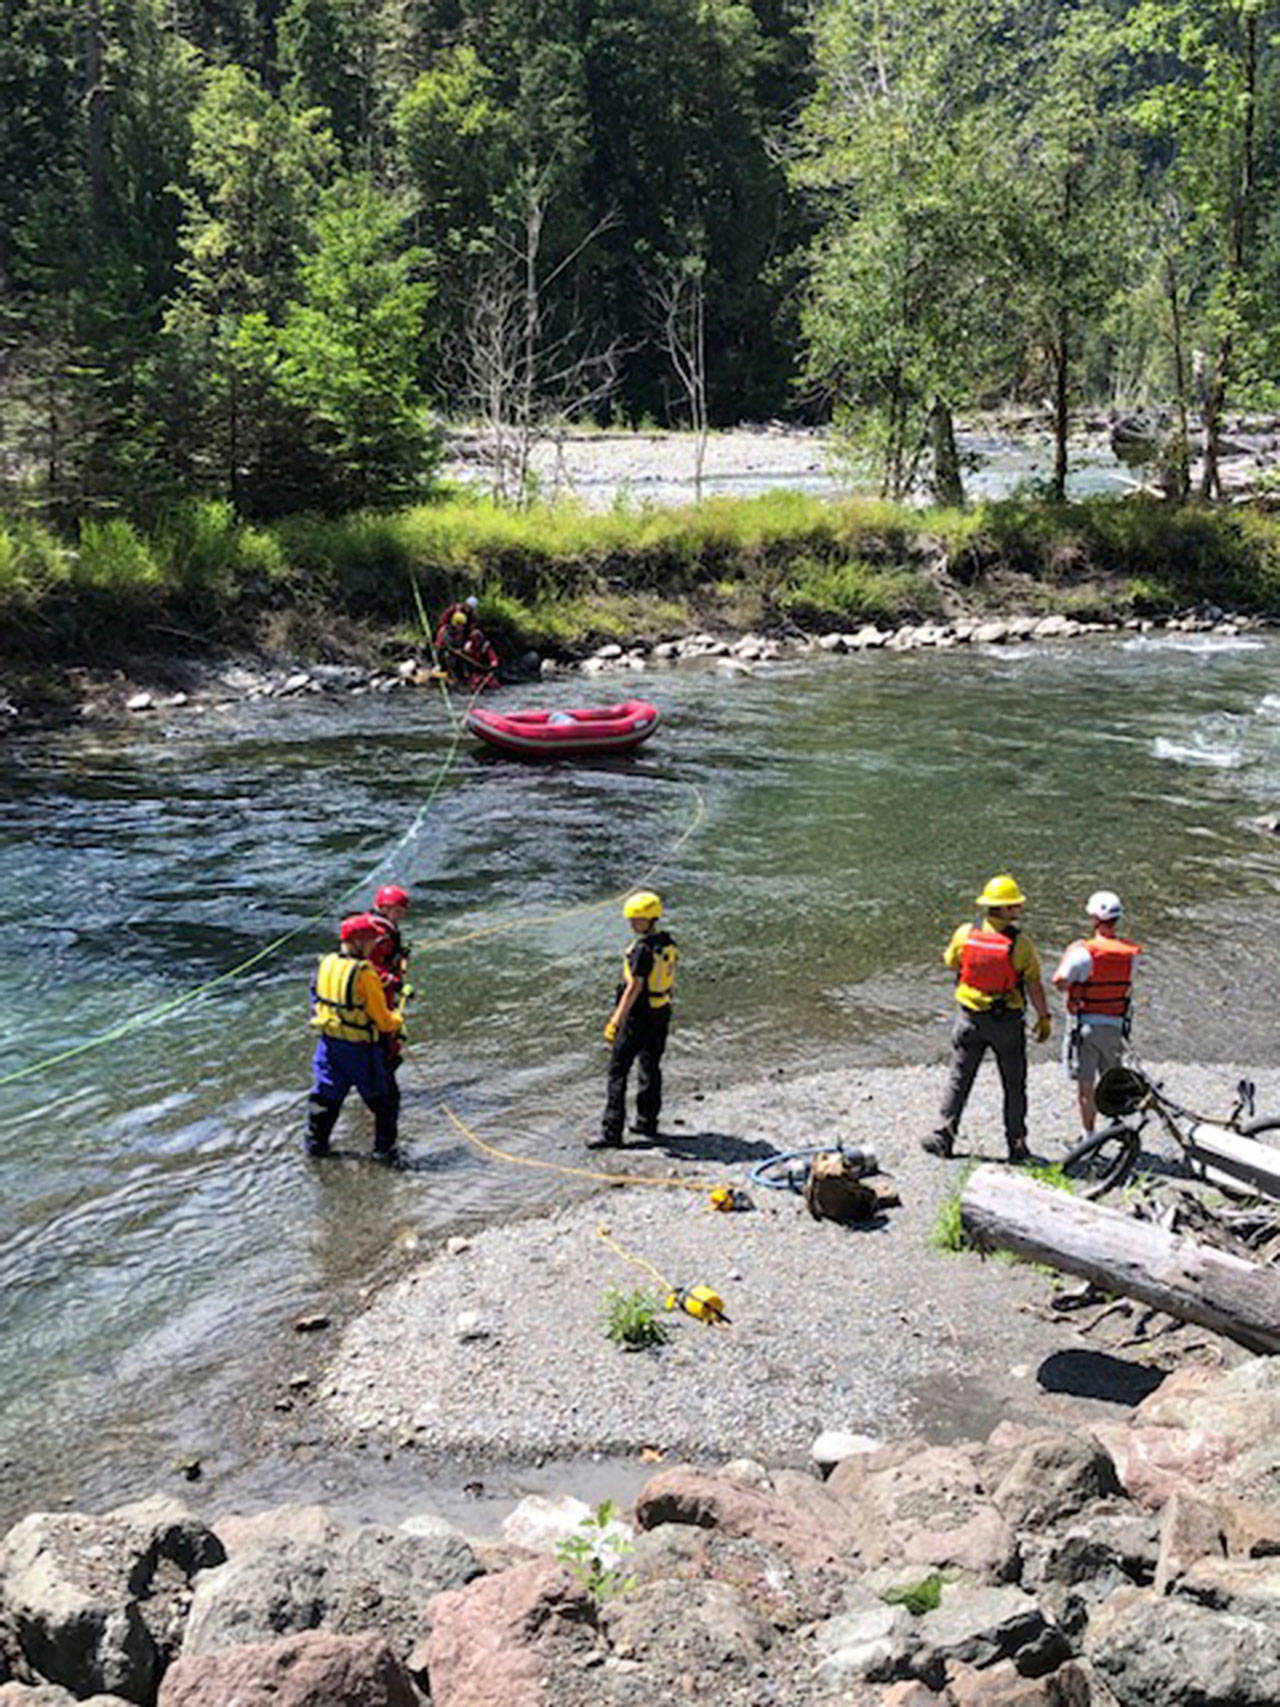 A man was rescued from an island in the Elwha River on Monday after getting swept away by its fast-moving waters. (Clallam County Fire District 2)